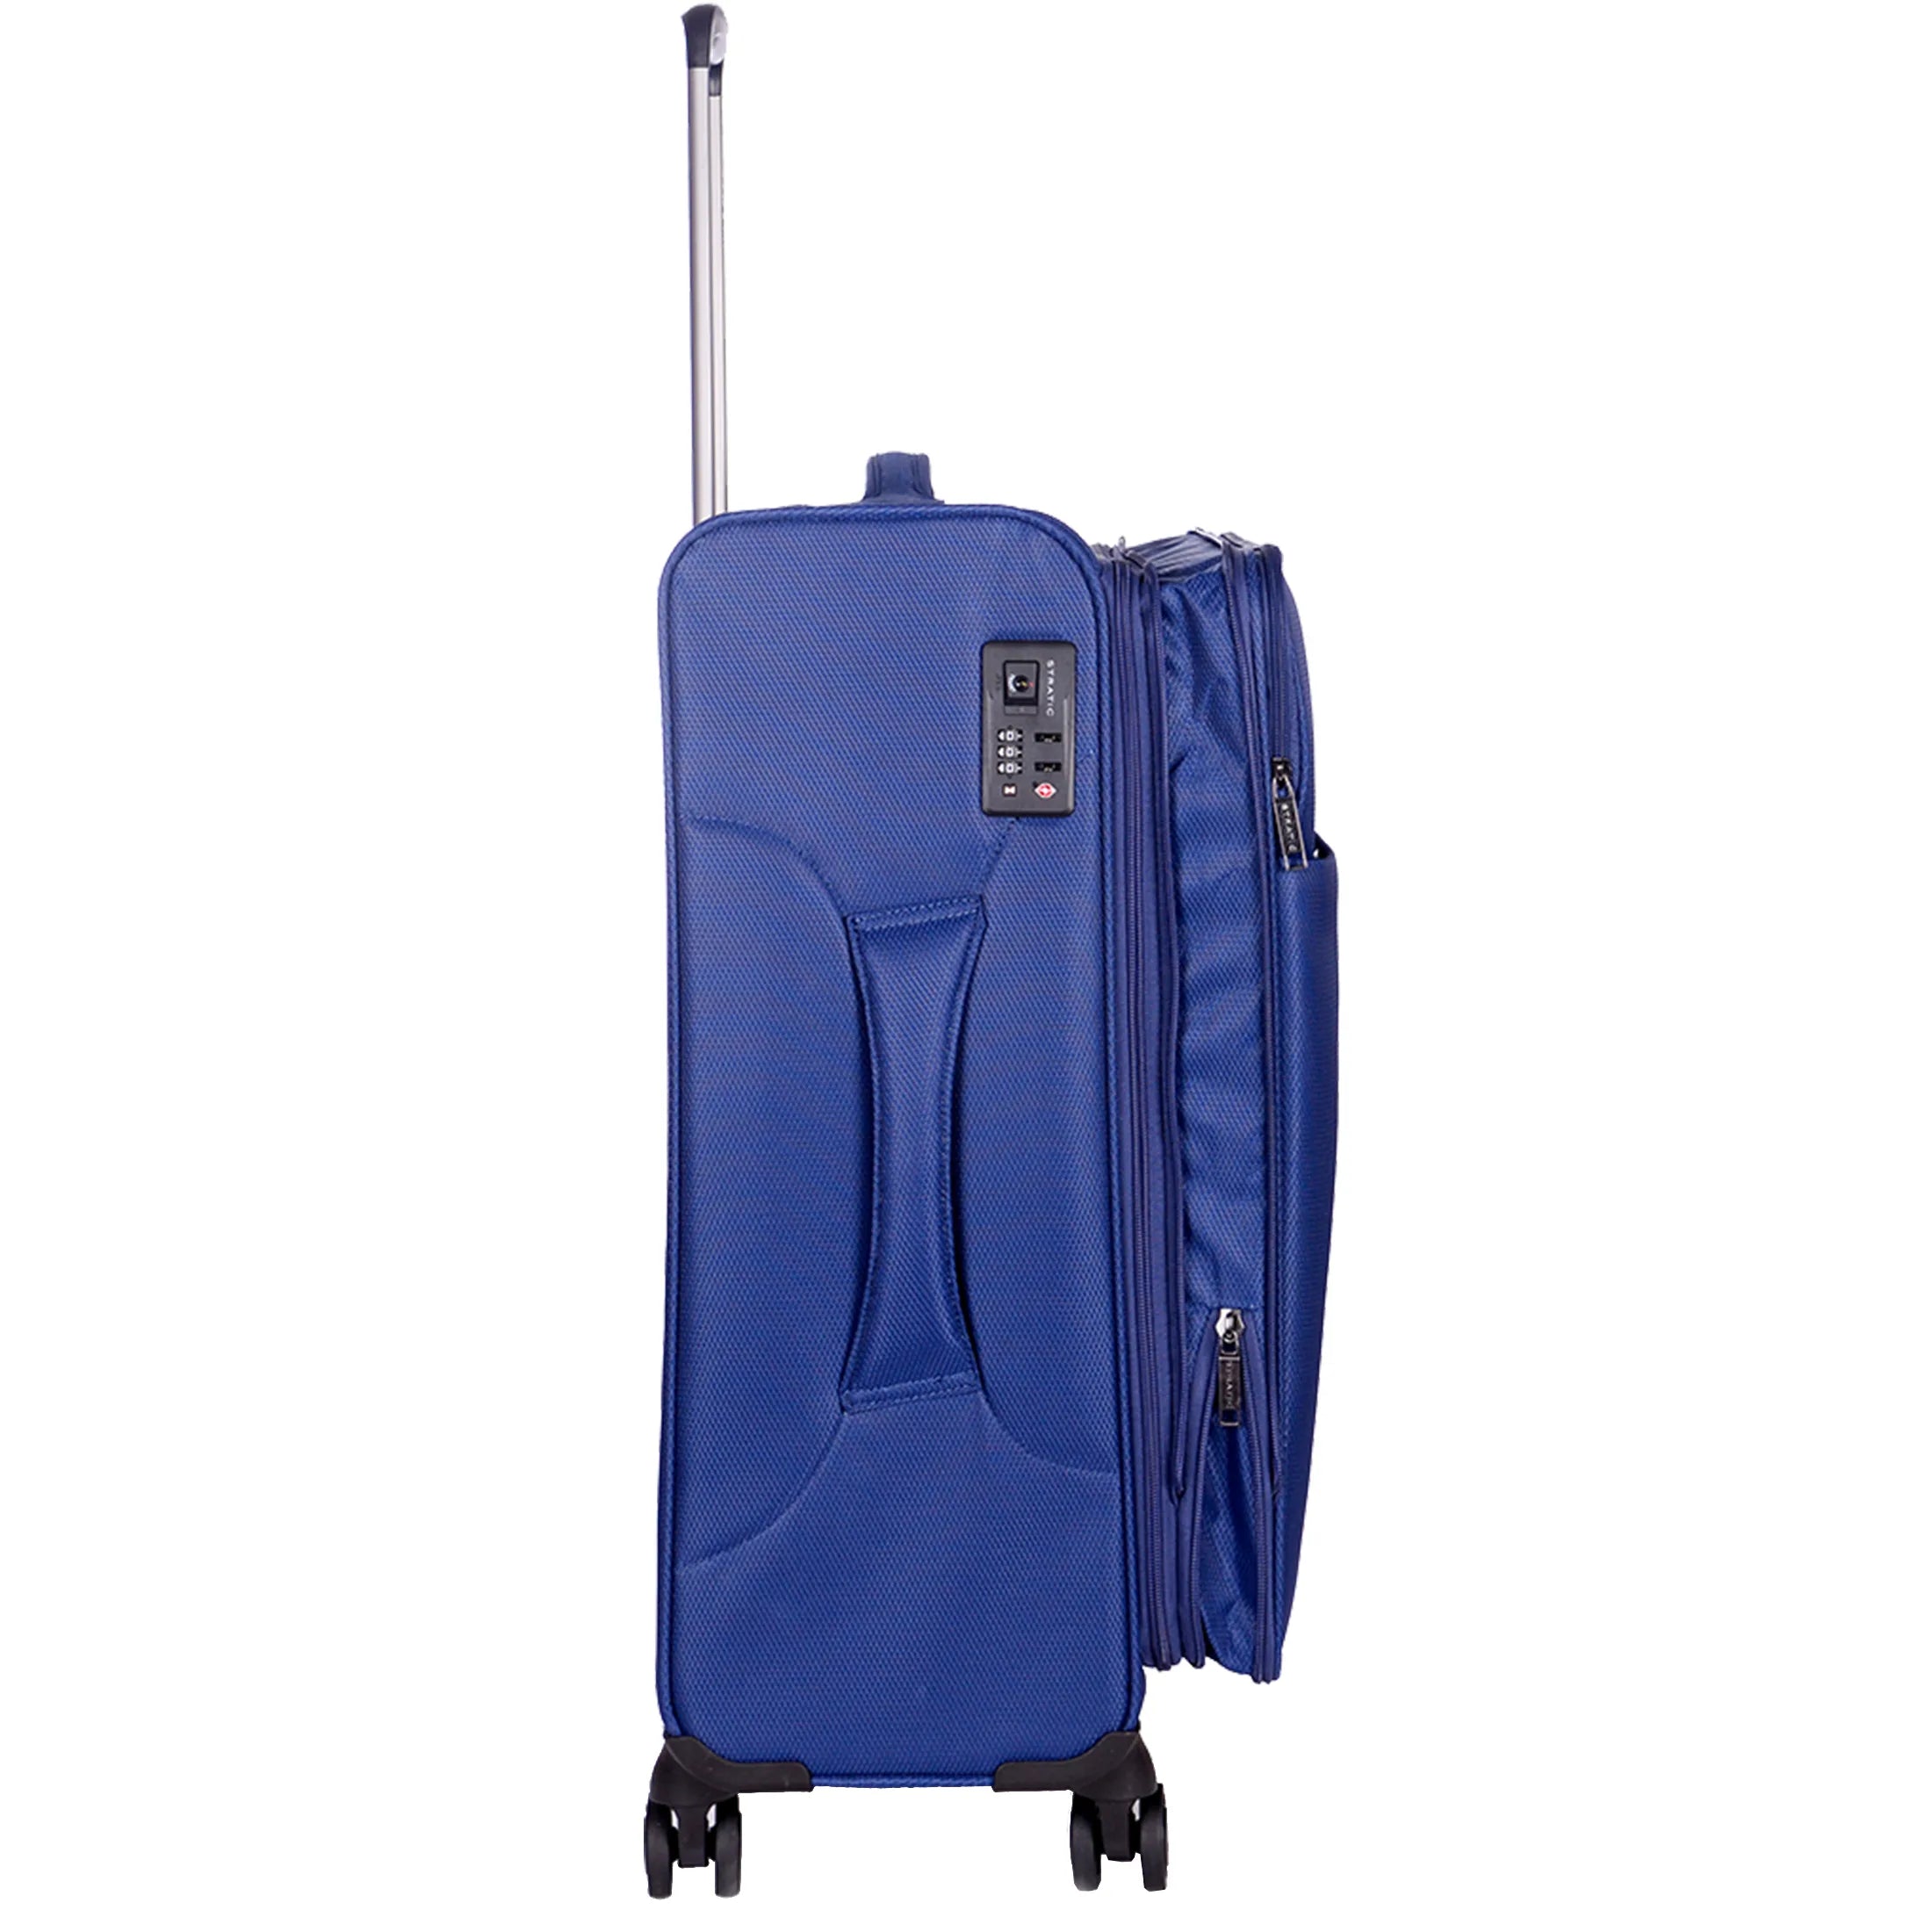 Stratic Light + trolley 4 roues 68 cm - Menthe